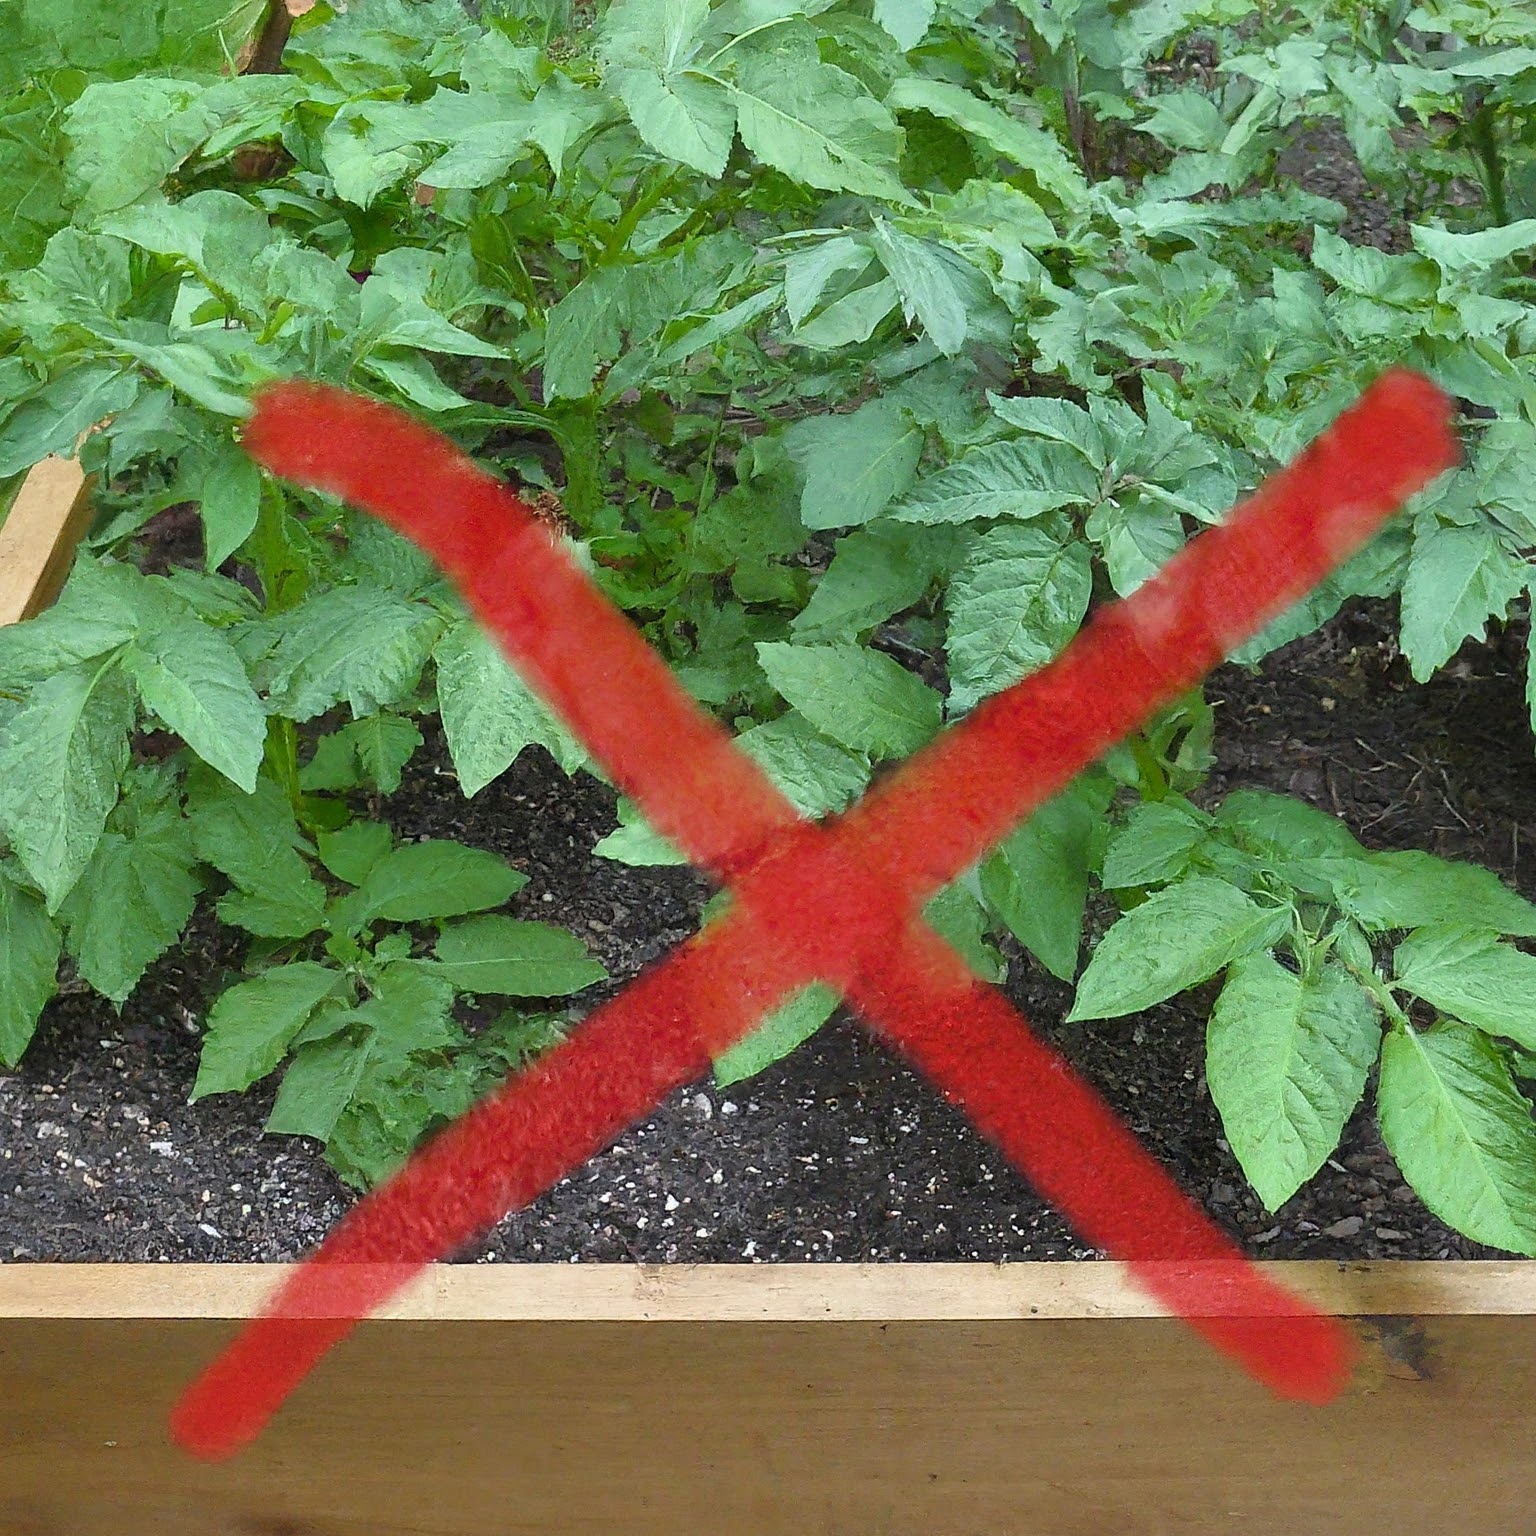 plants to avoid putting near tomatoes